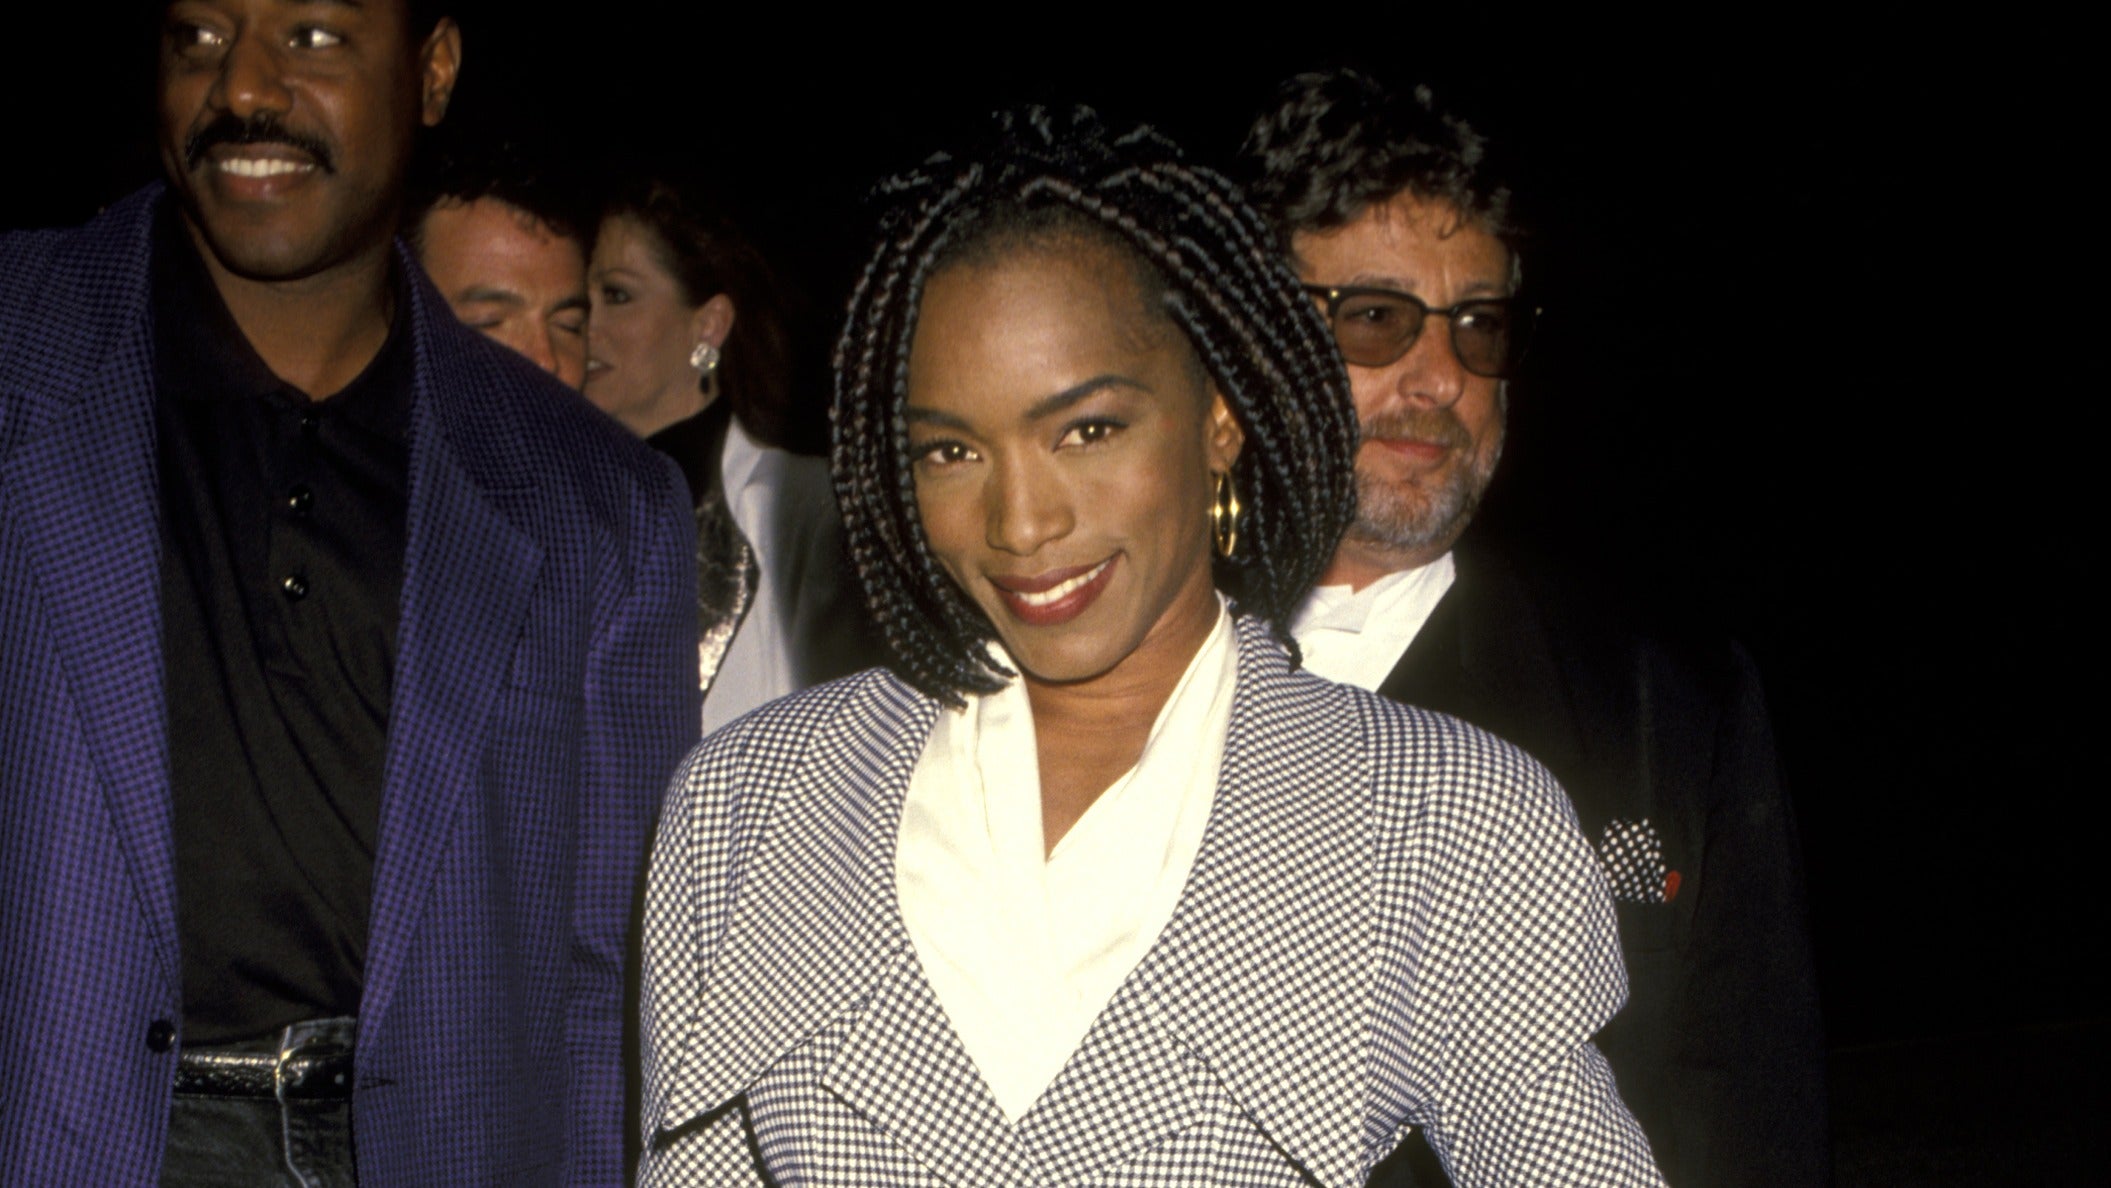 Channeling Nostalgia With This Look: Angela Bassett